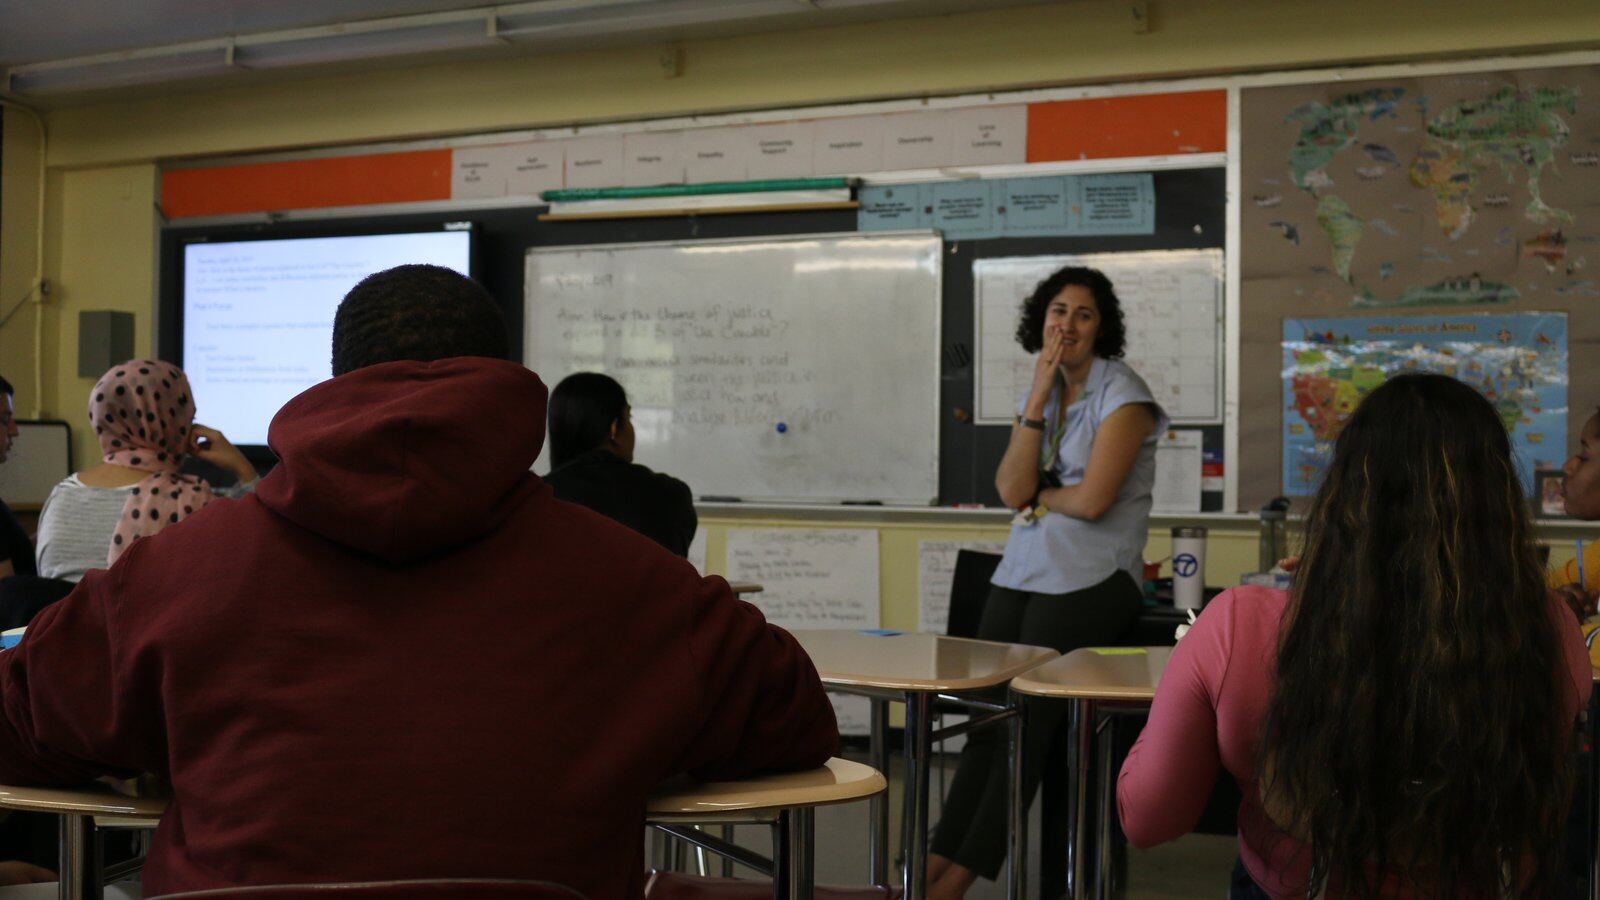 An English teacher chats about “The Crucible” with her class at ELLIS Prep Academy in the Bronx, a transfer school that serves immigrant students.